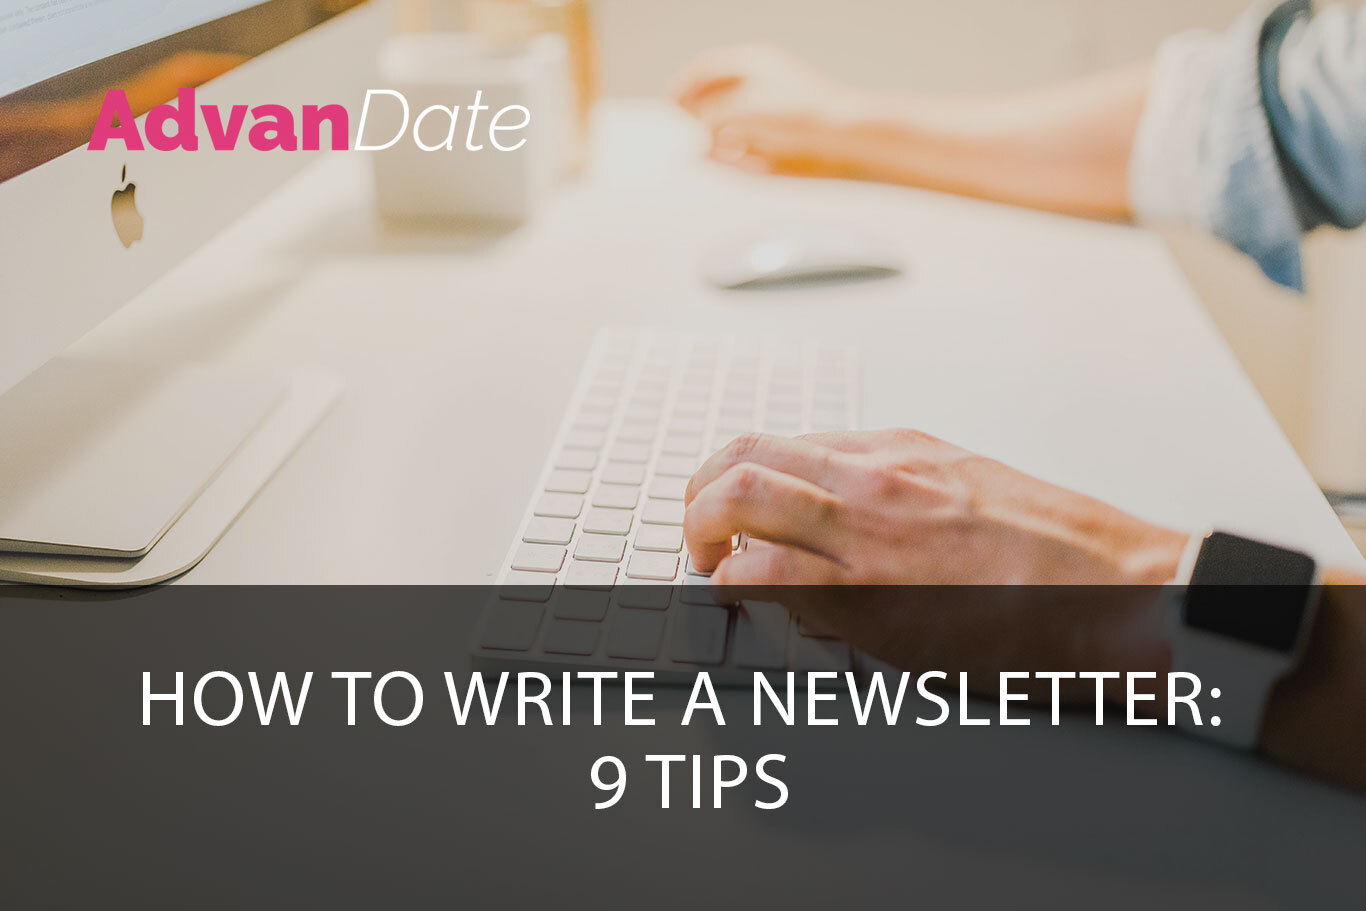 How to write a newsletter: 9 tips